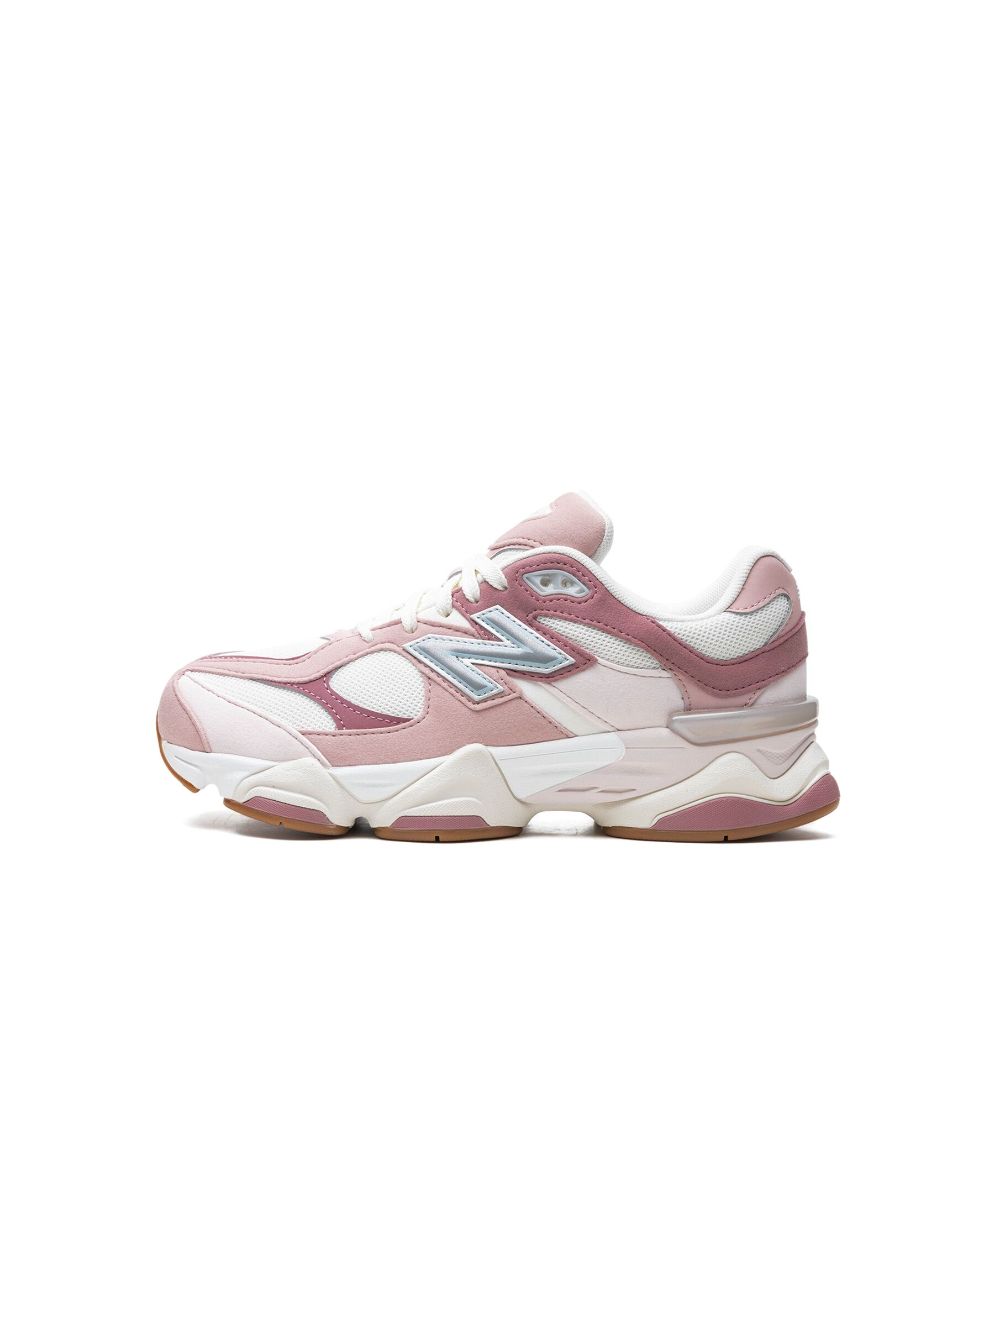 Shop New Balance 9060 "rose Pink" Sneakers